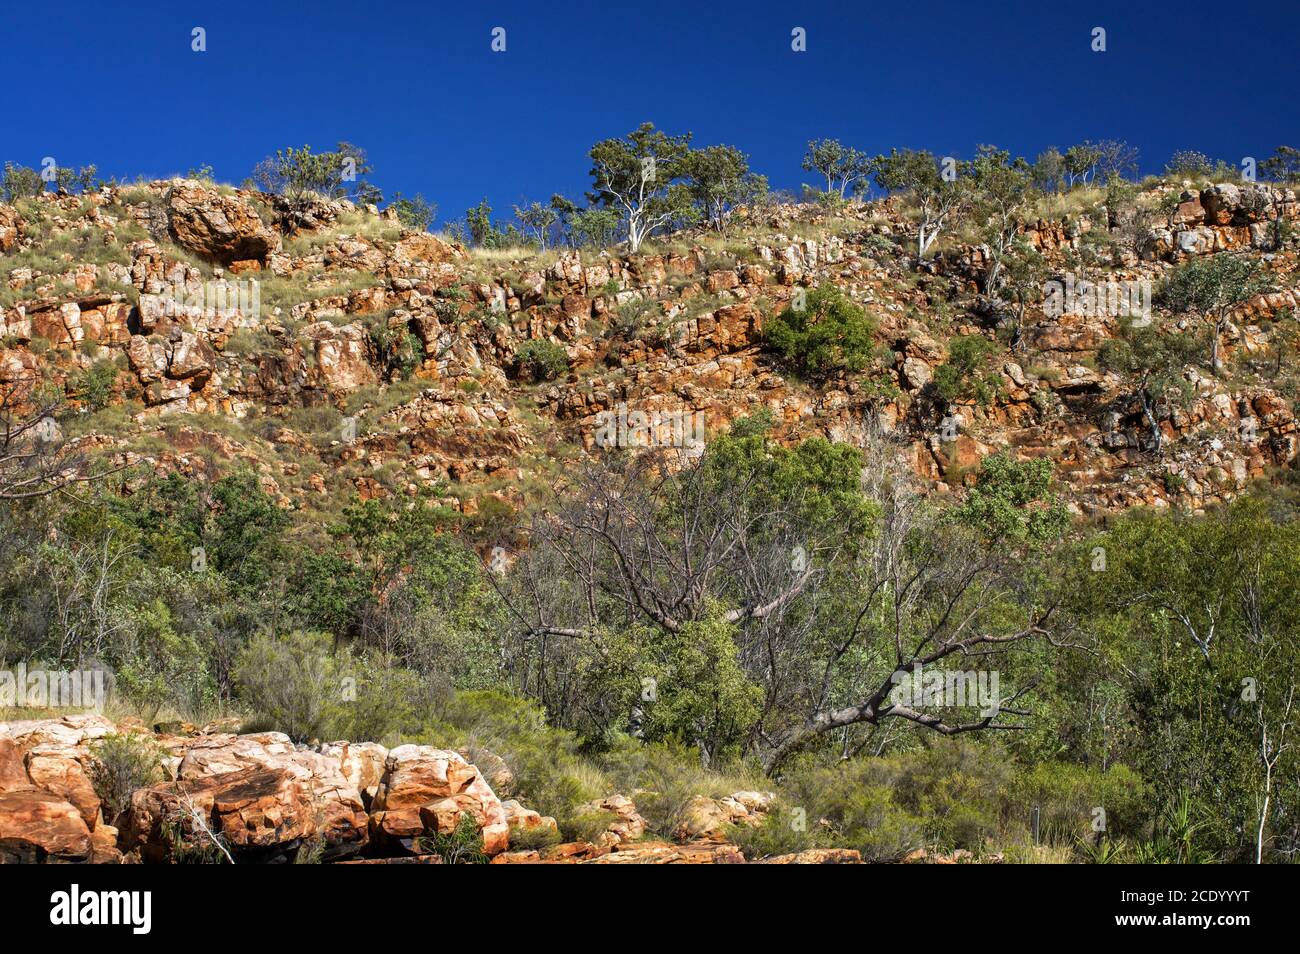 Nature photographer on a hiking trip at the Australian outback at rocky environment between Eucalyptus tree Stock Photo